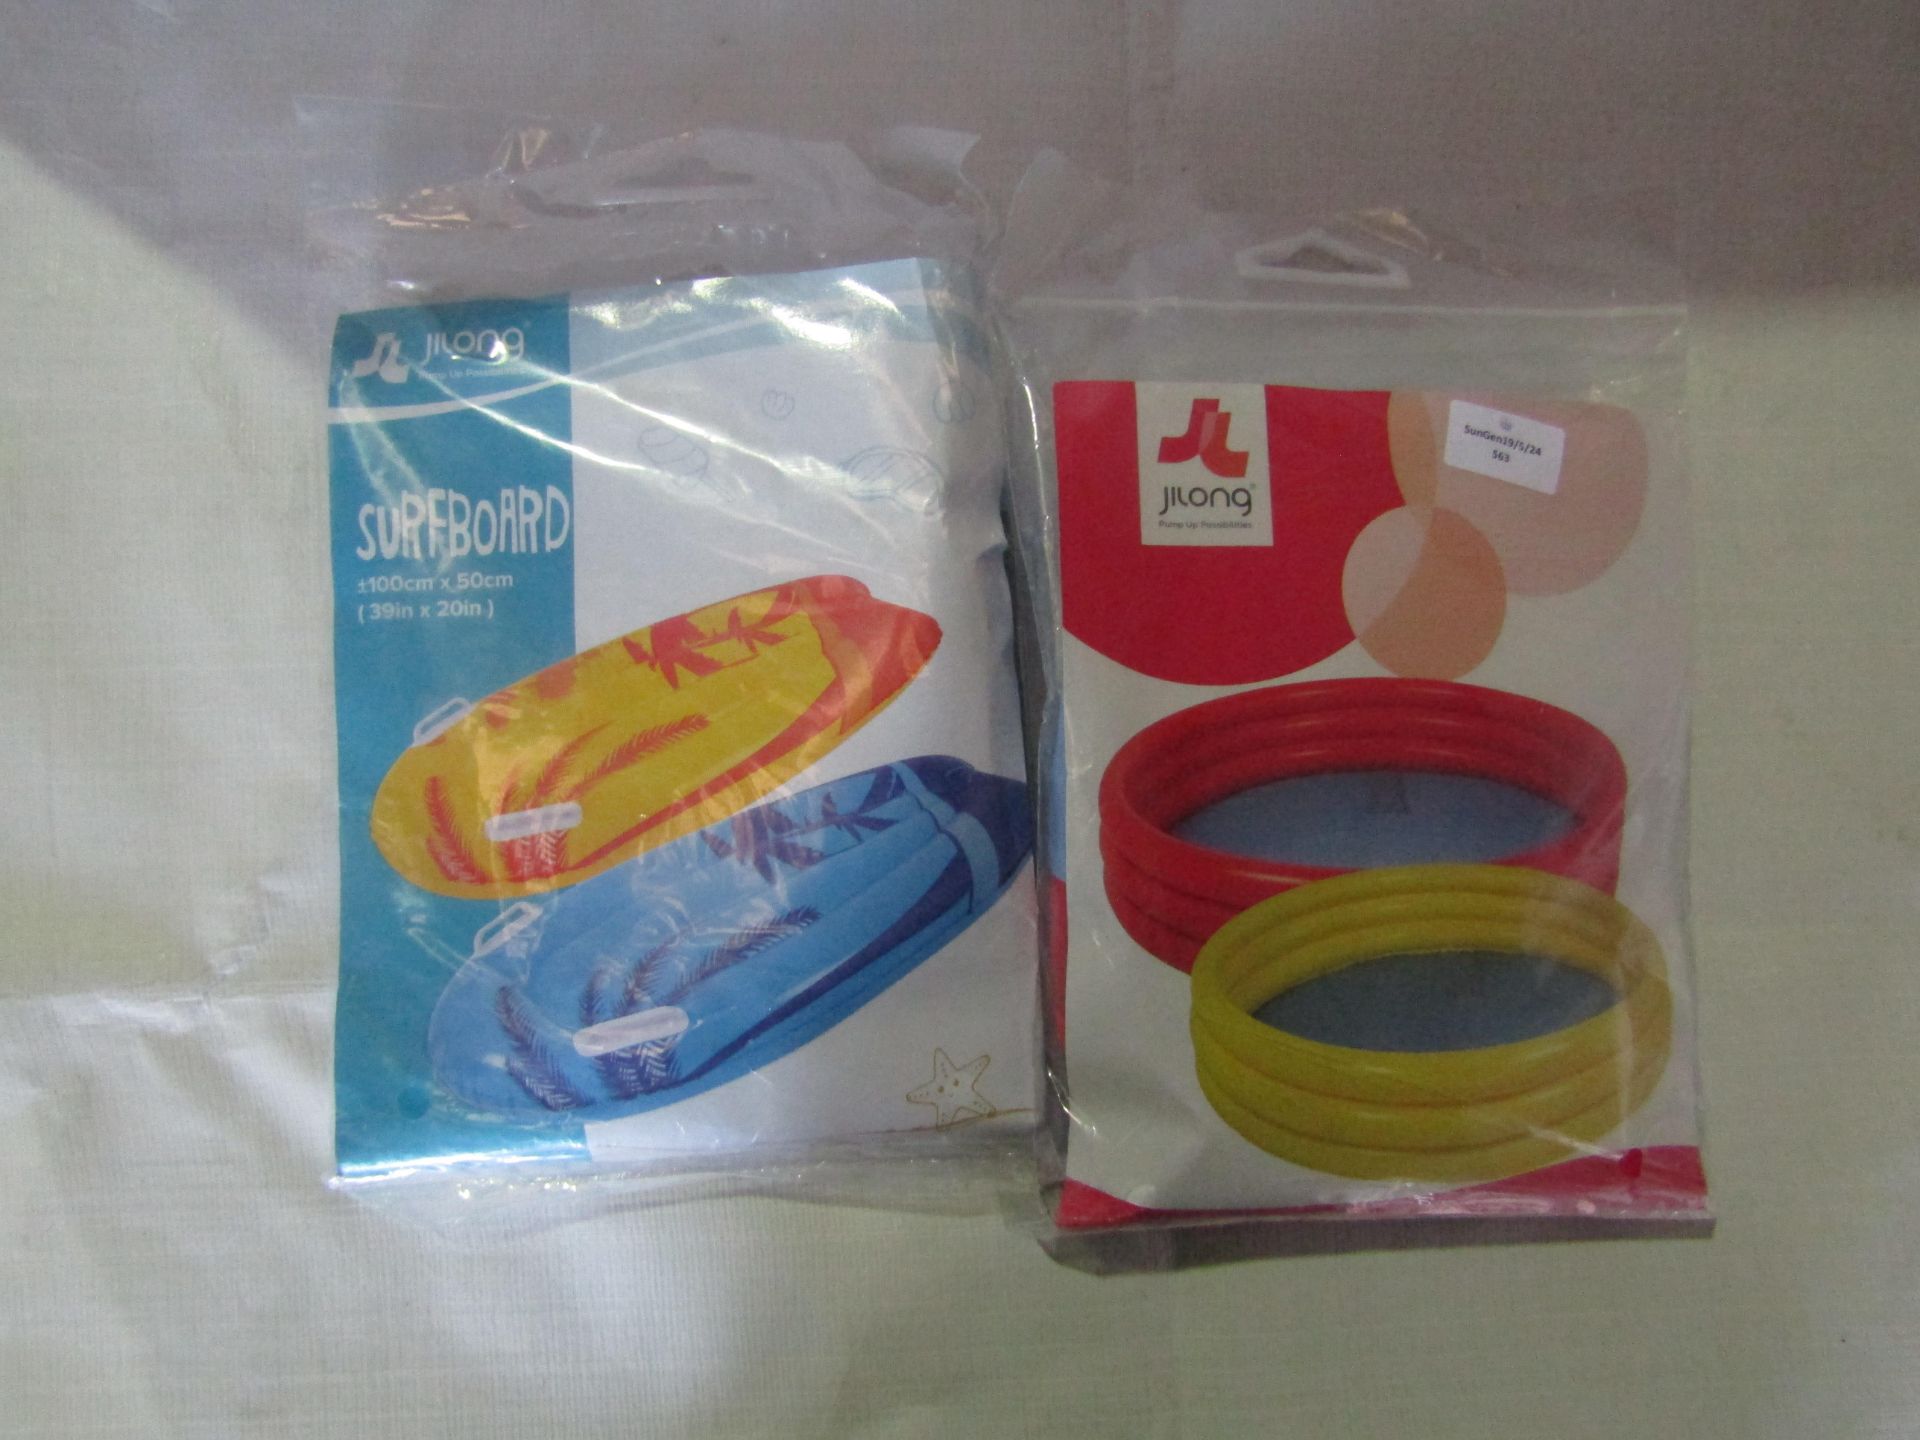 2x Items Being - 1x Jilong Blow Up Inflatable Surfboard, Size: 100x50cm - 1x 3 Ring Inflatable Pool,